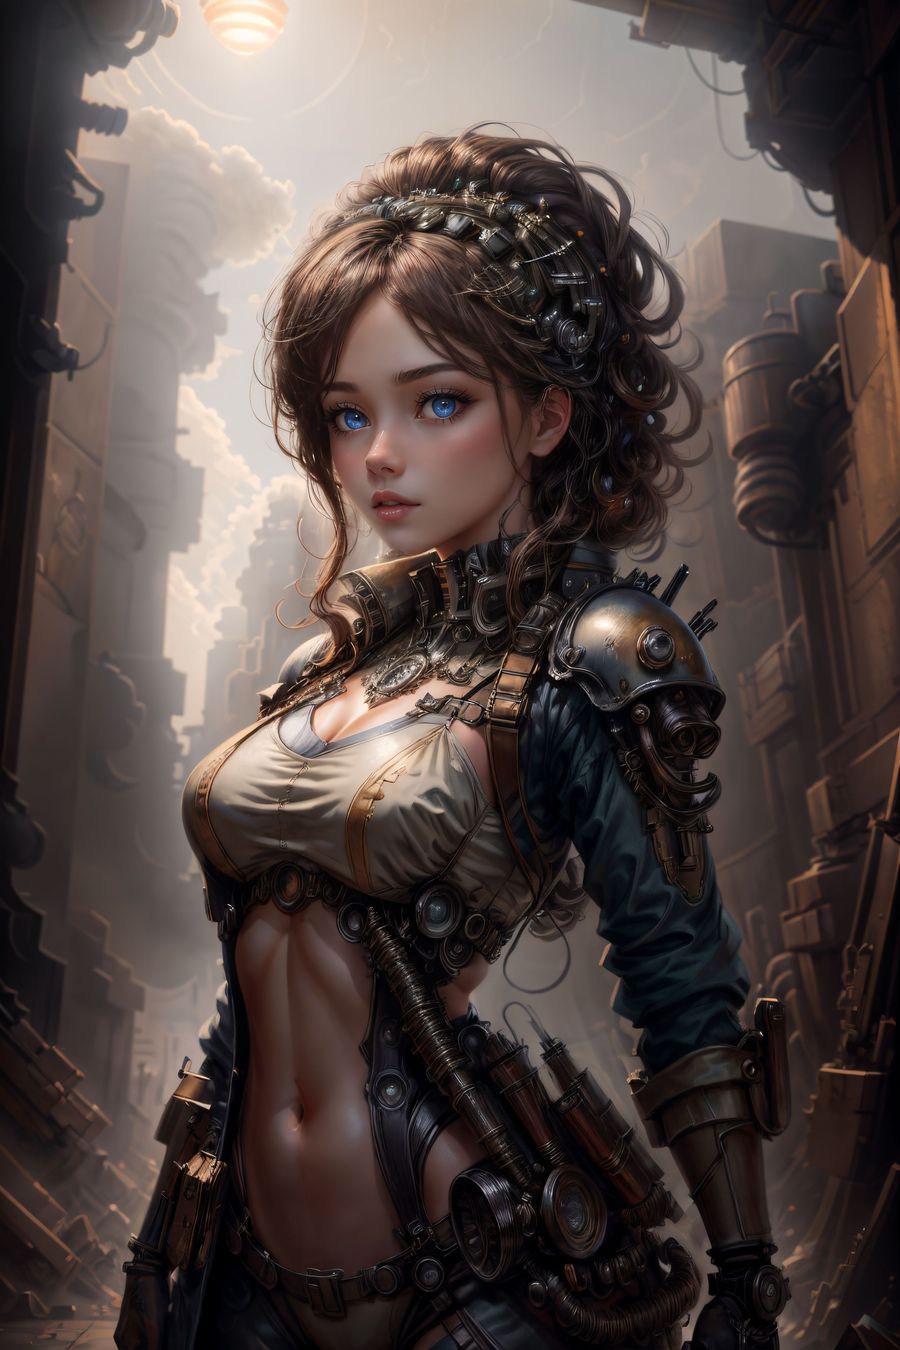 In a world that marries the aesthetics of the past with the futuristic visions of tomorrow, a captivating figure emerges—a Military Dieselpunk Girl, a blend of vintage military style and cutting-edge technology. She stands as a living testament to an era that never was, a fusion of history and imagination.